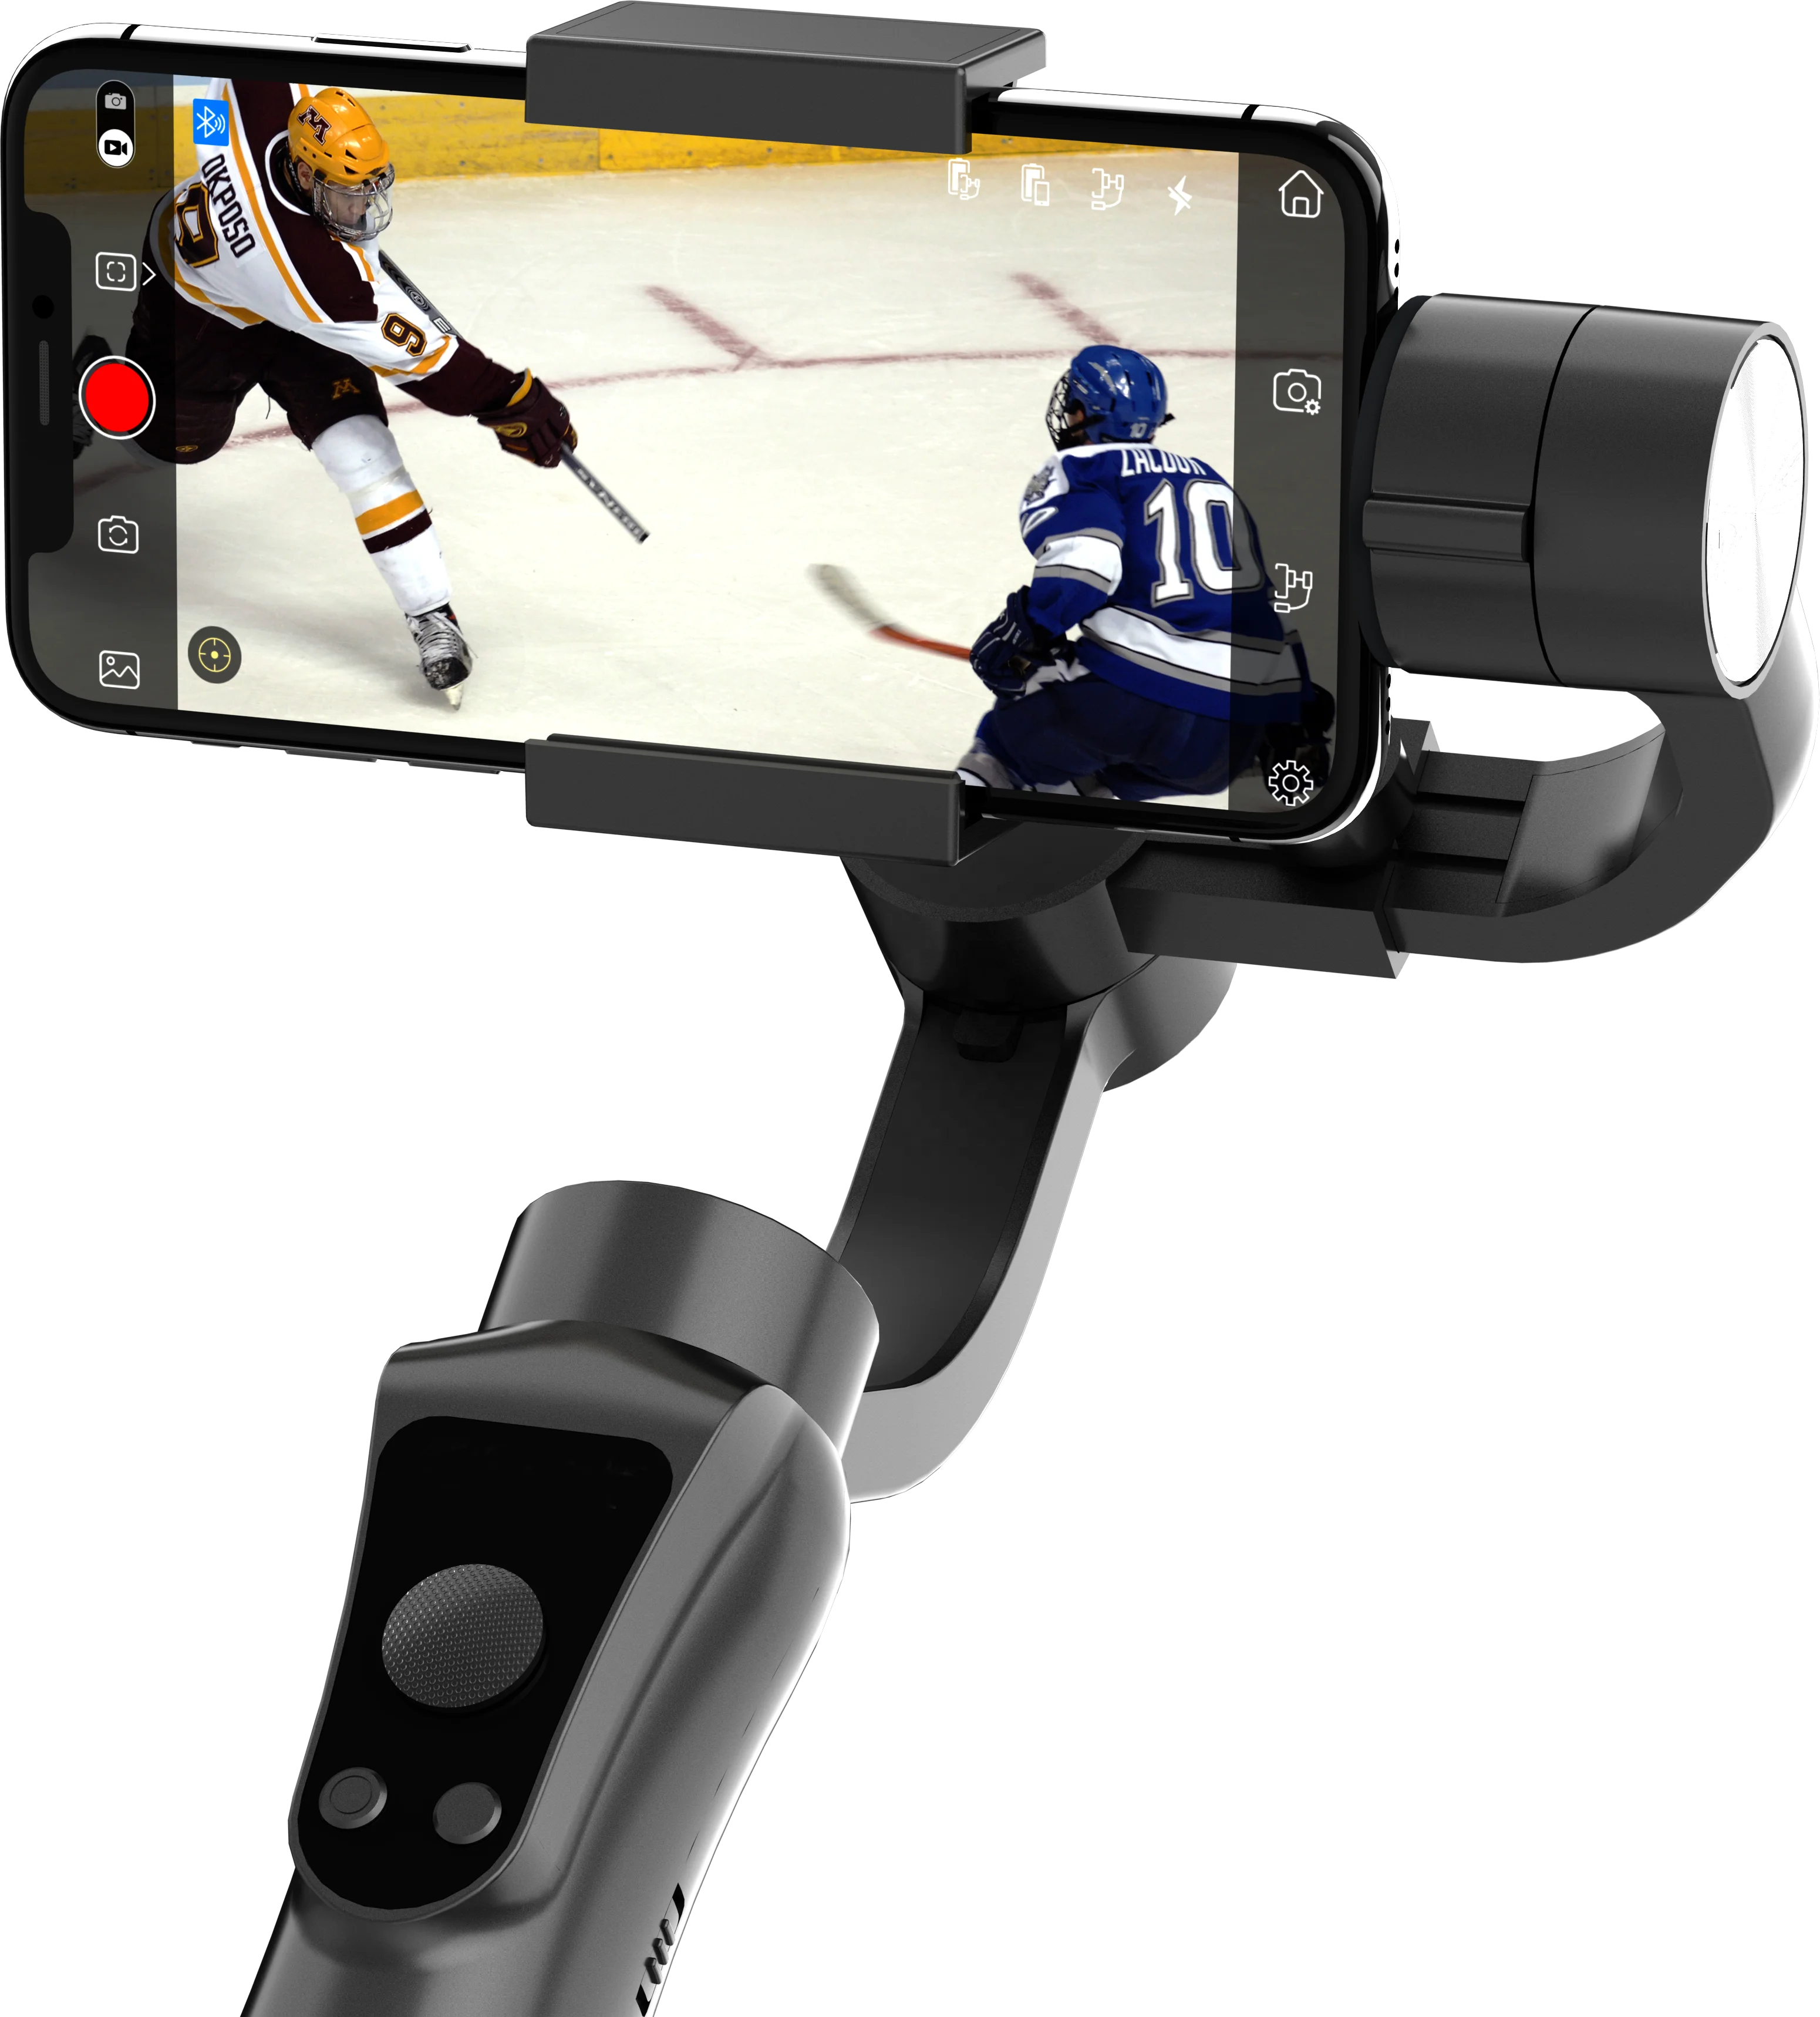 

Gimbal Stabilizer for Mobile Smartphone Vlog Live Video Record with Sport Inception Mode Face Object Tracking Motion Time